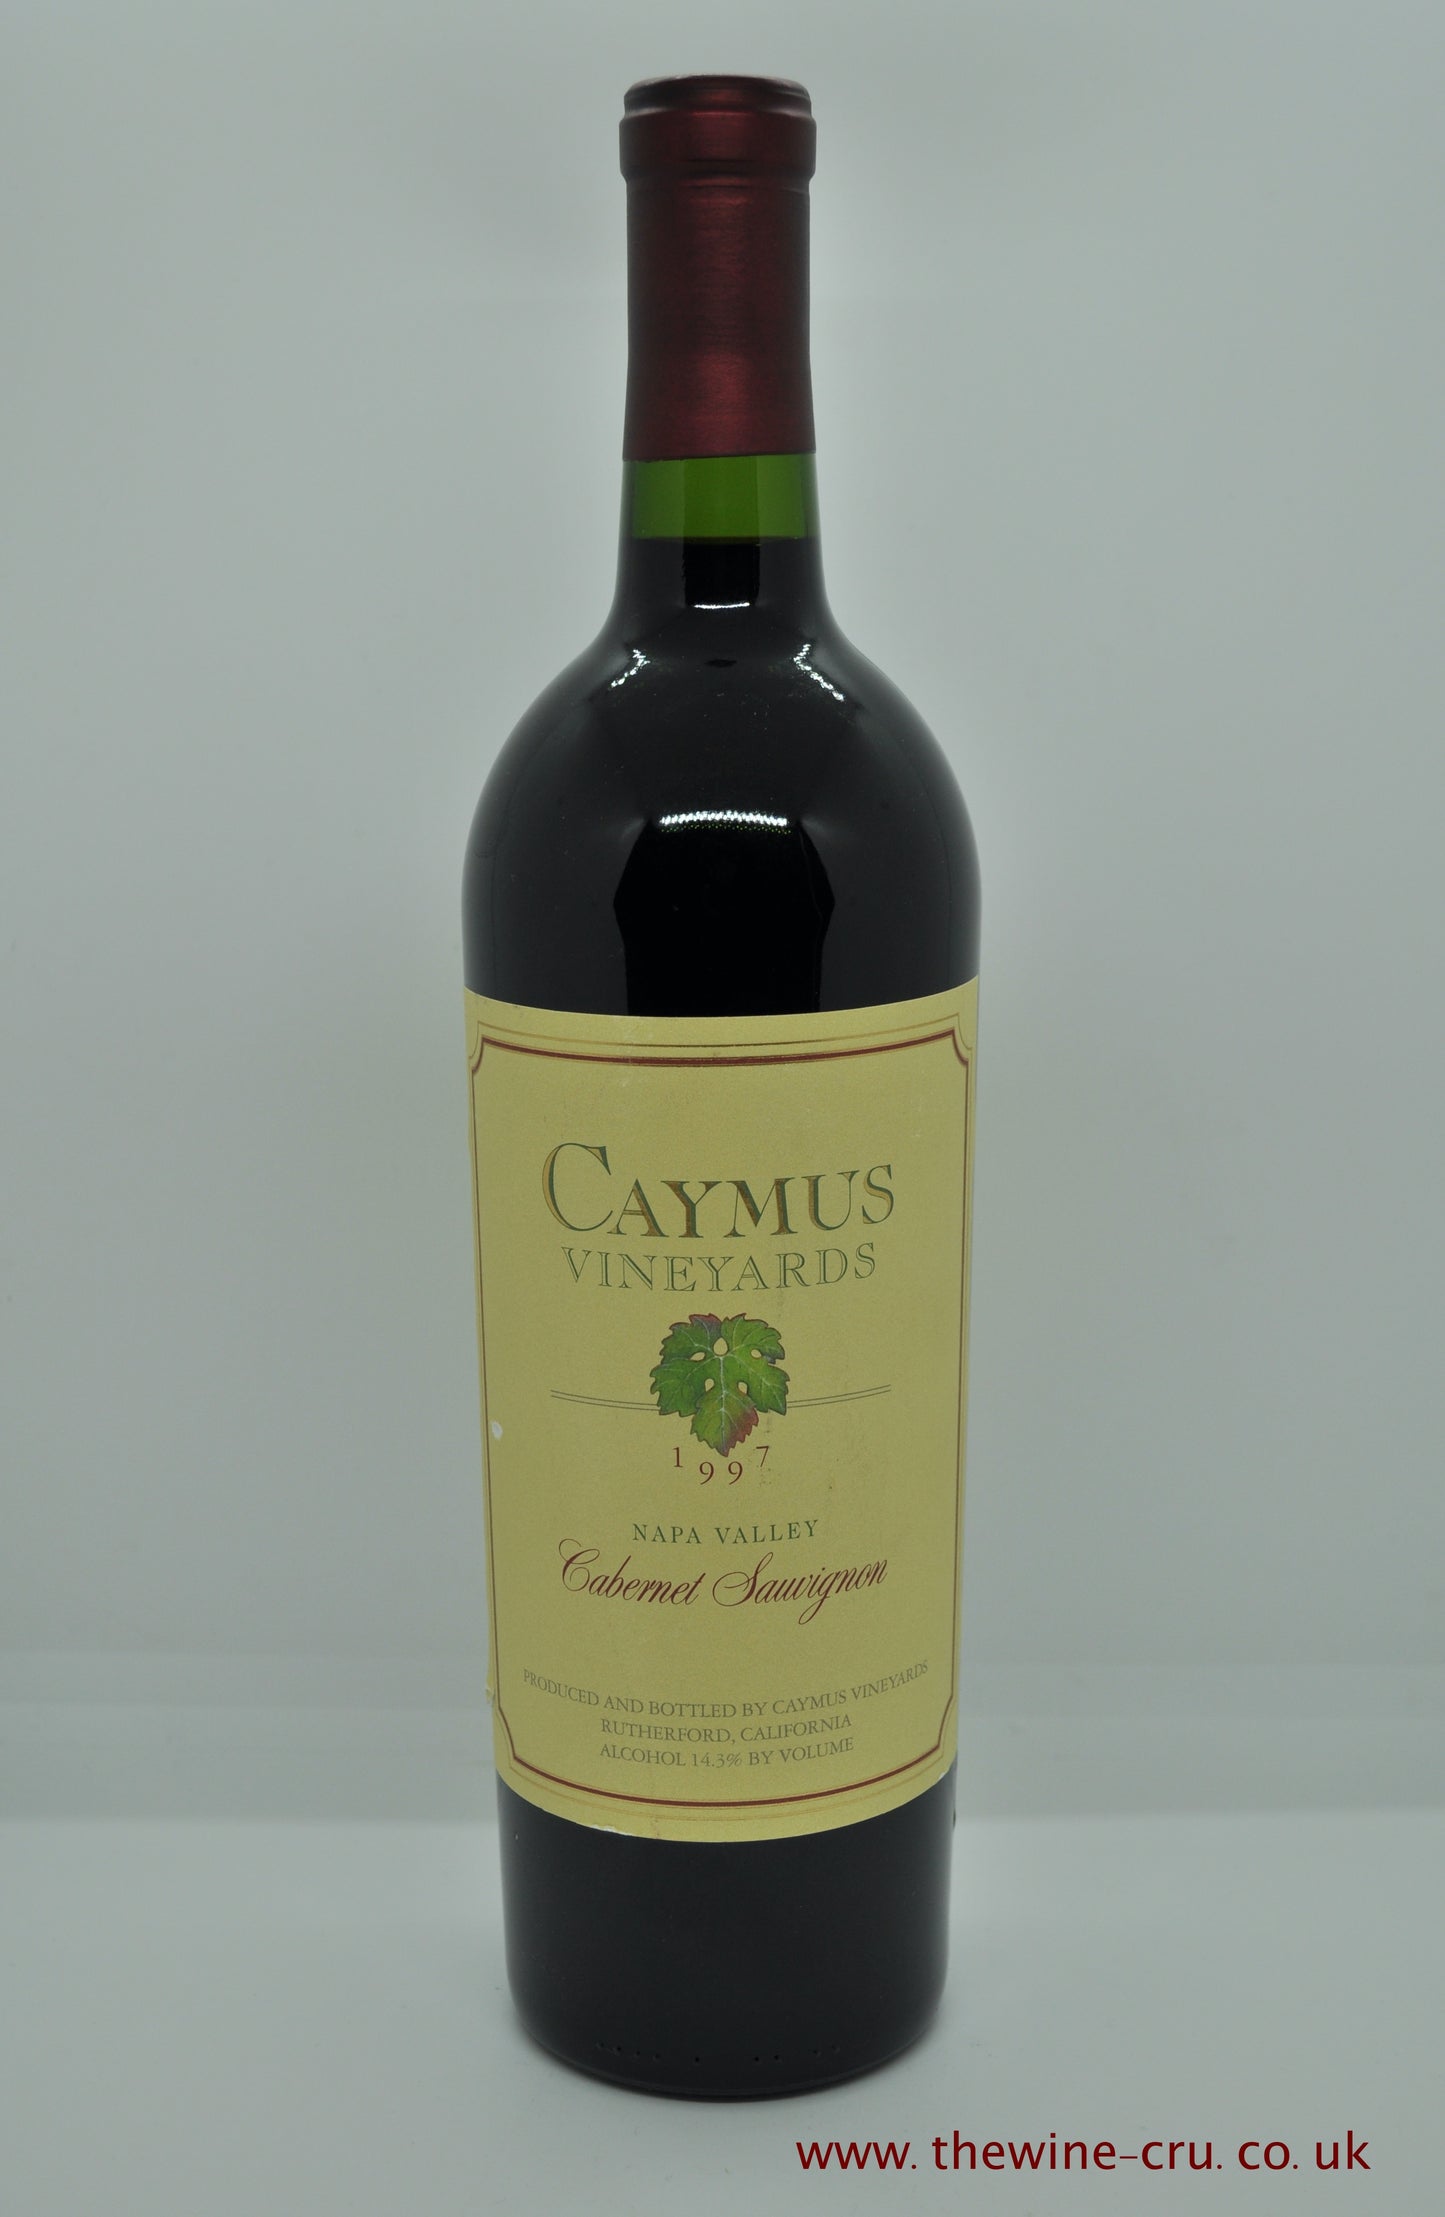 1997 vintage red wine. Caymus Vineyards Napa Valley Cabernet Sauvignon 1997. USA, California. Immediate delivery. Free local delivery.